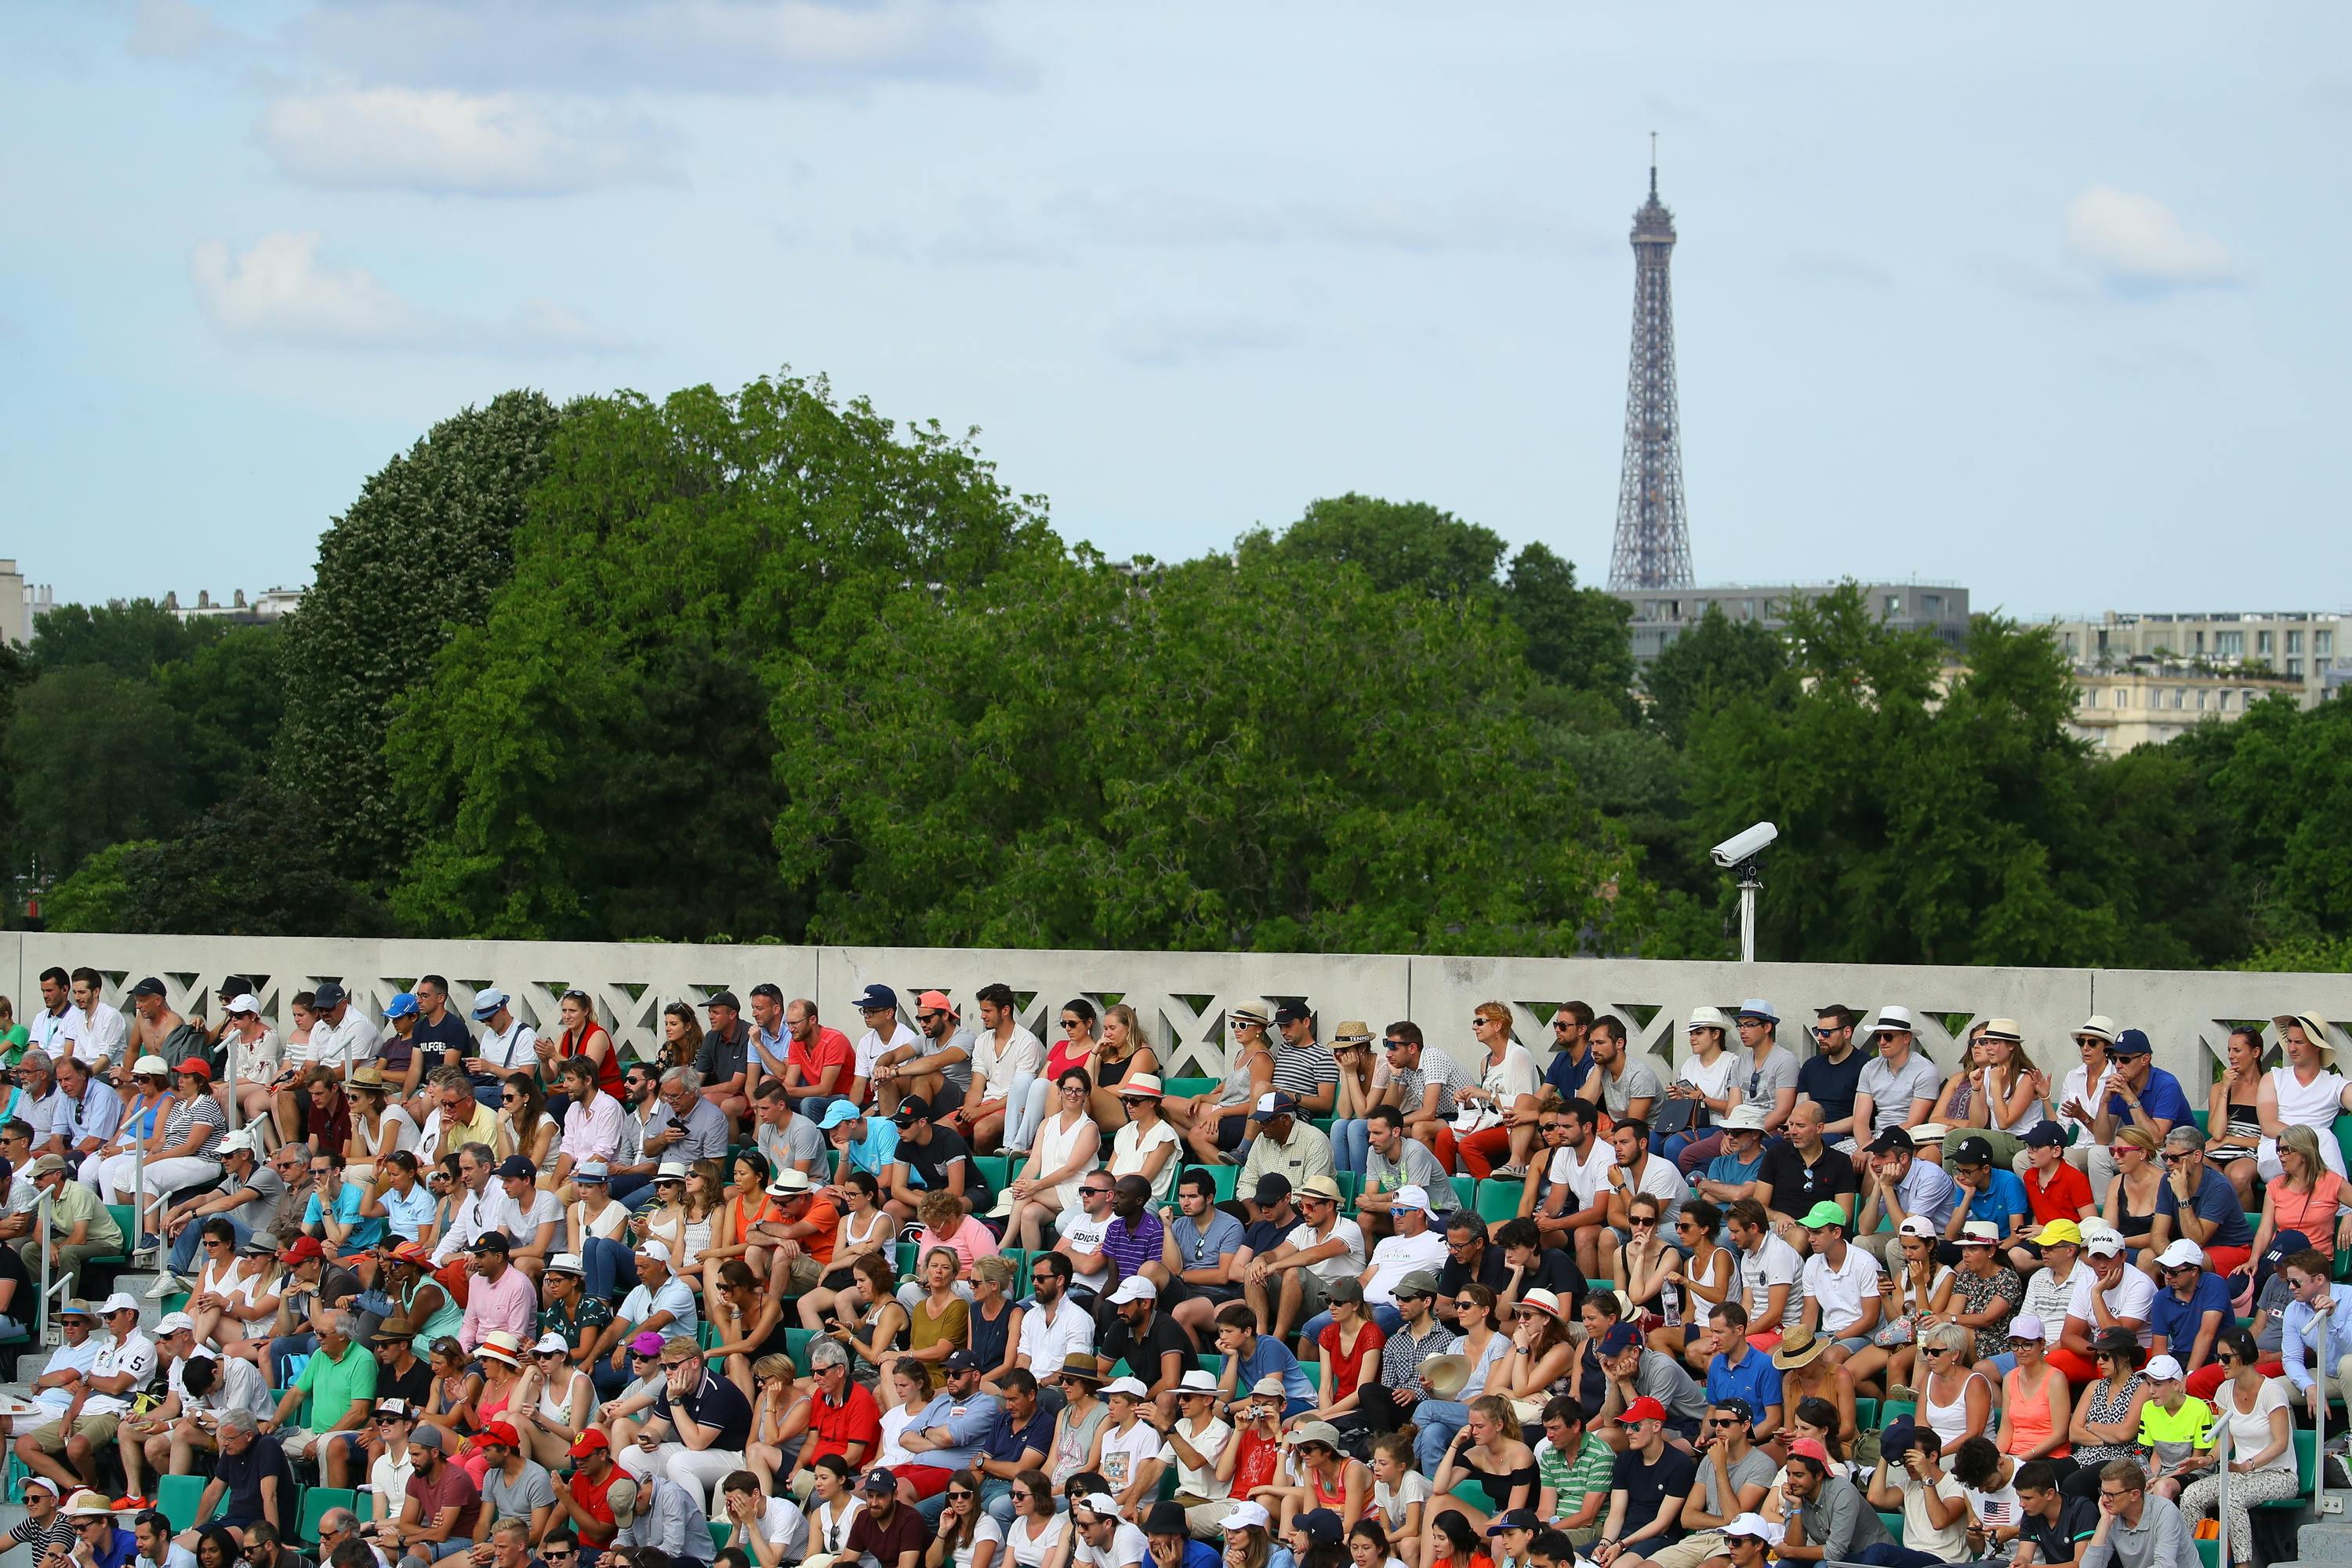 The Eiffel Tower pieces the skyline as crowds watch on during Kids Day.